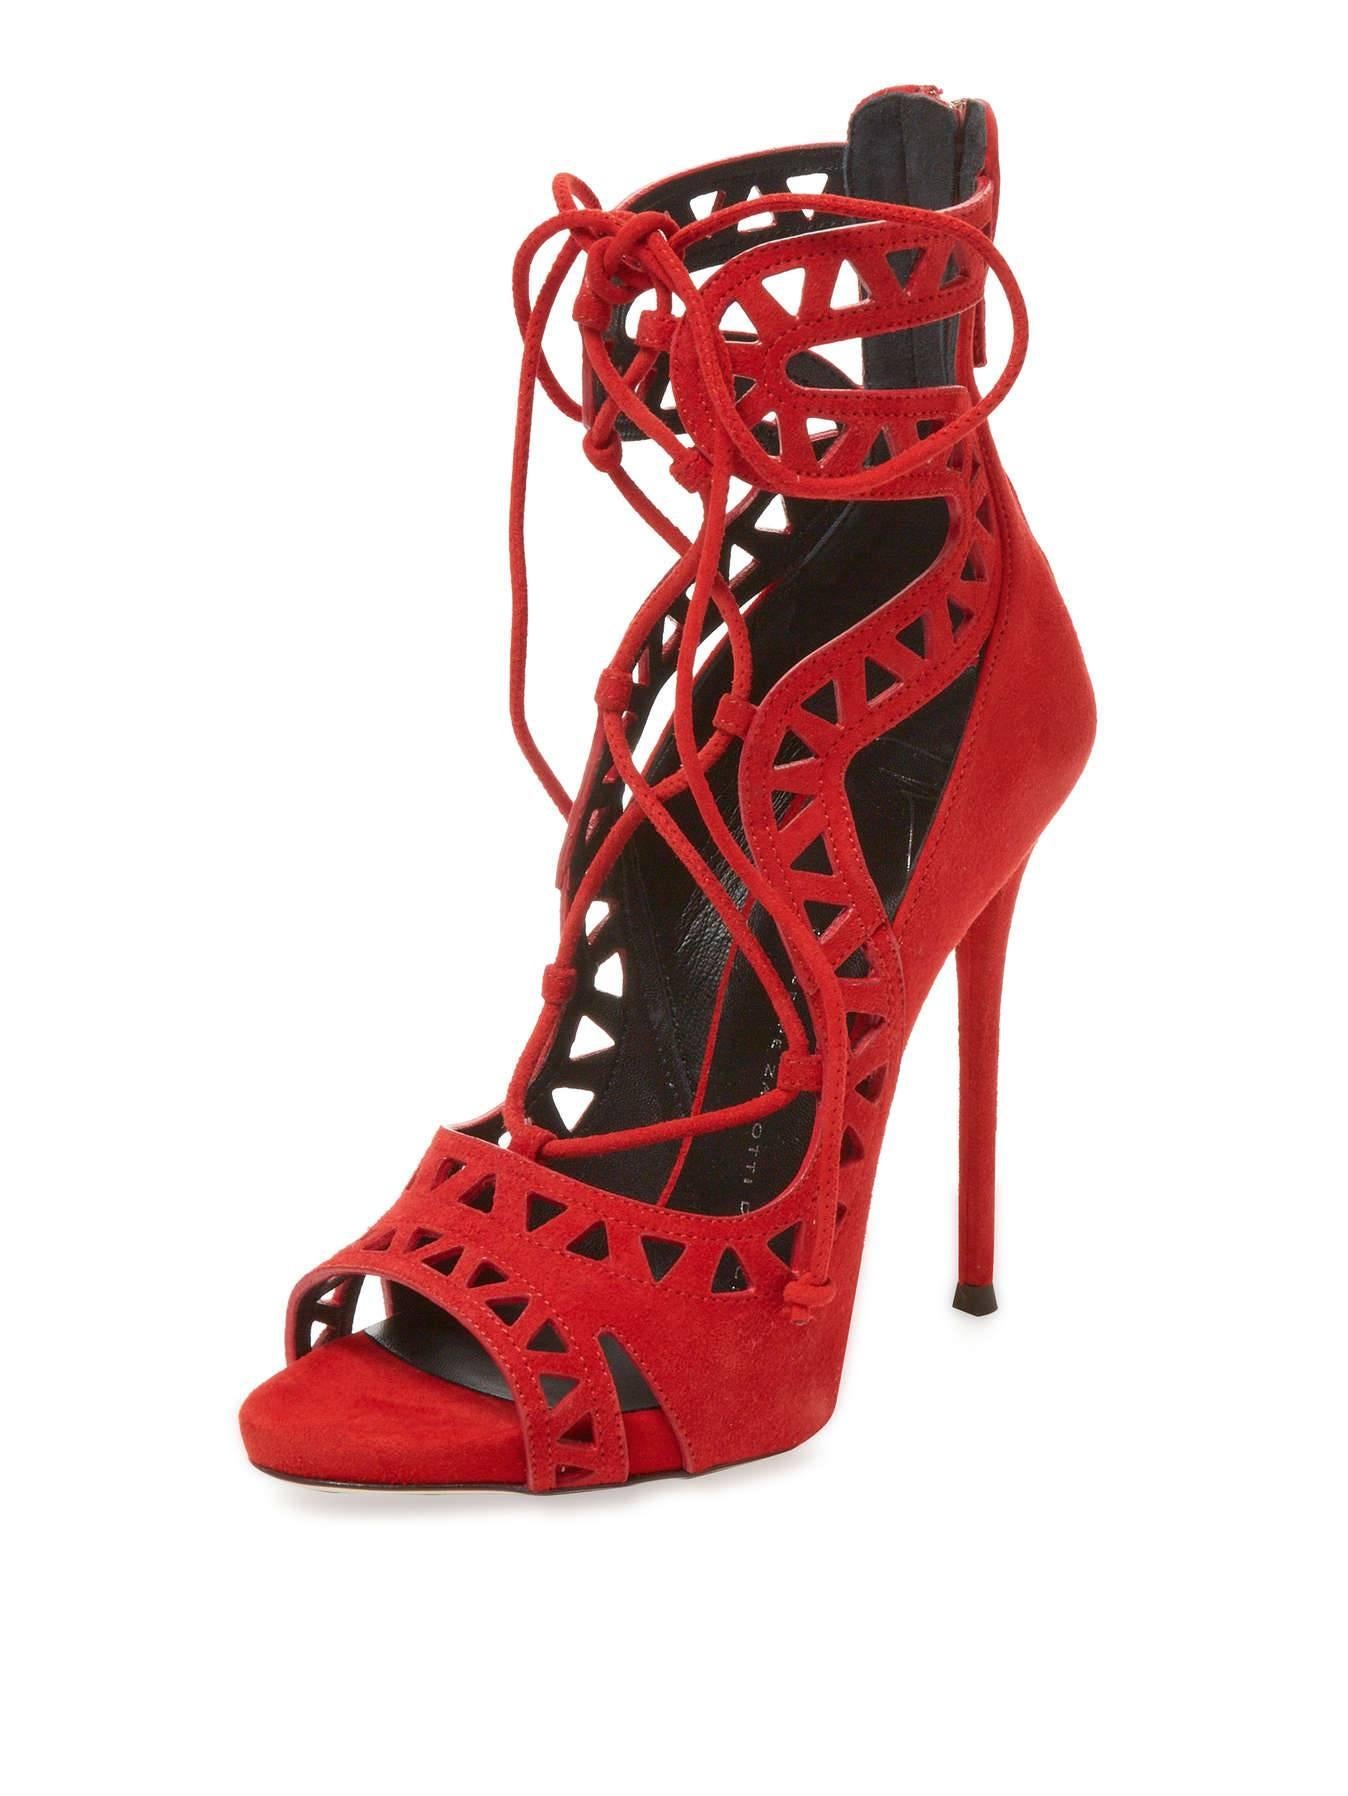 CURATOR'S NOTES  

Giuseppe Zanotti NEW Red Suede Cut Out Lace Up Sandals Heels Booties in Box   

Size IT 36 
Suede  
Zipper back closure 
Lace-up closure 
Made in Italy 
Heel height 5